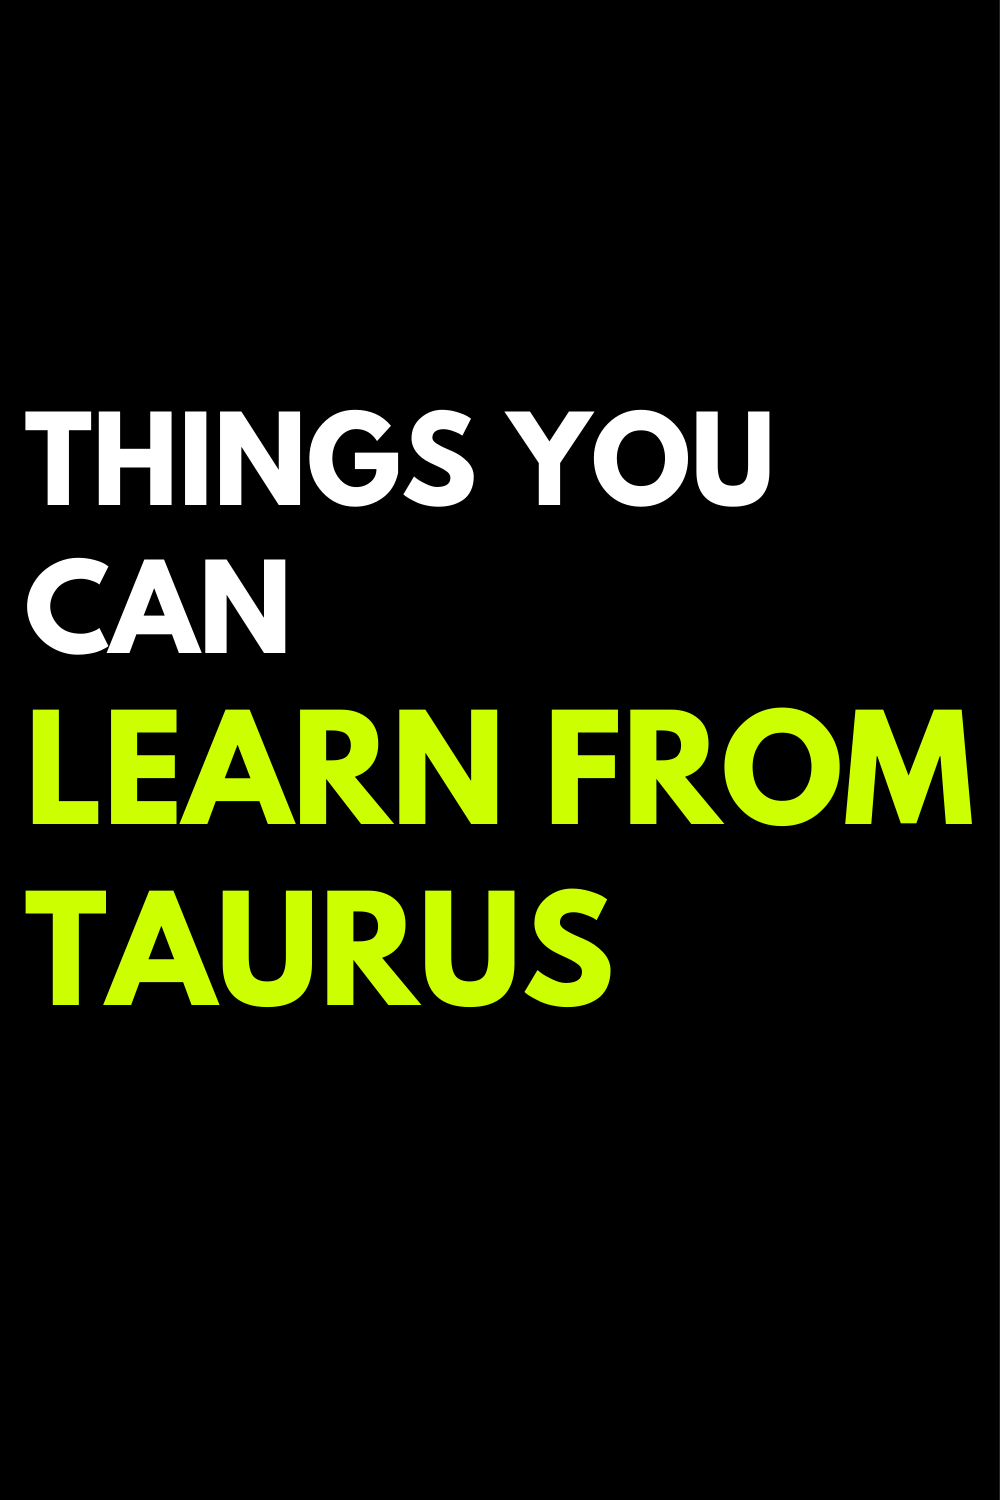 Things you can learn from Taurus